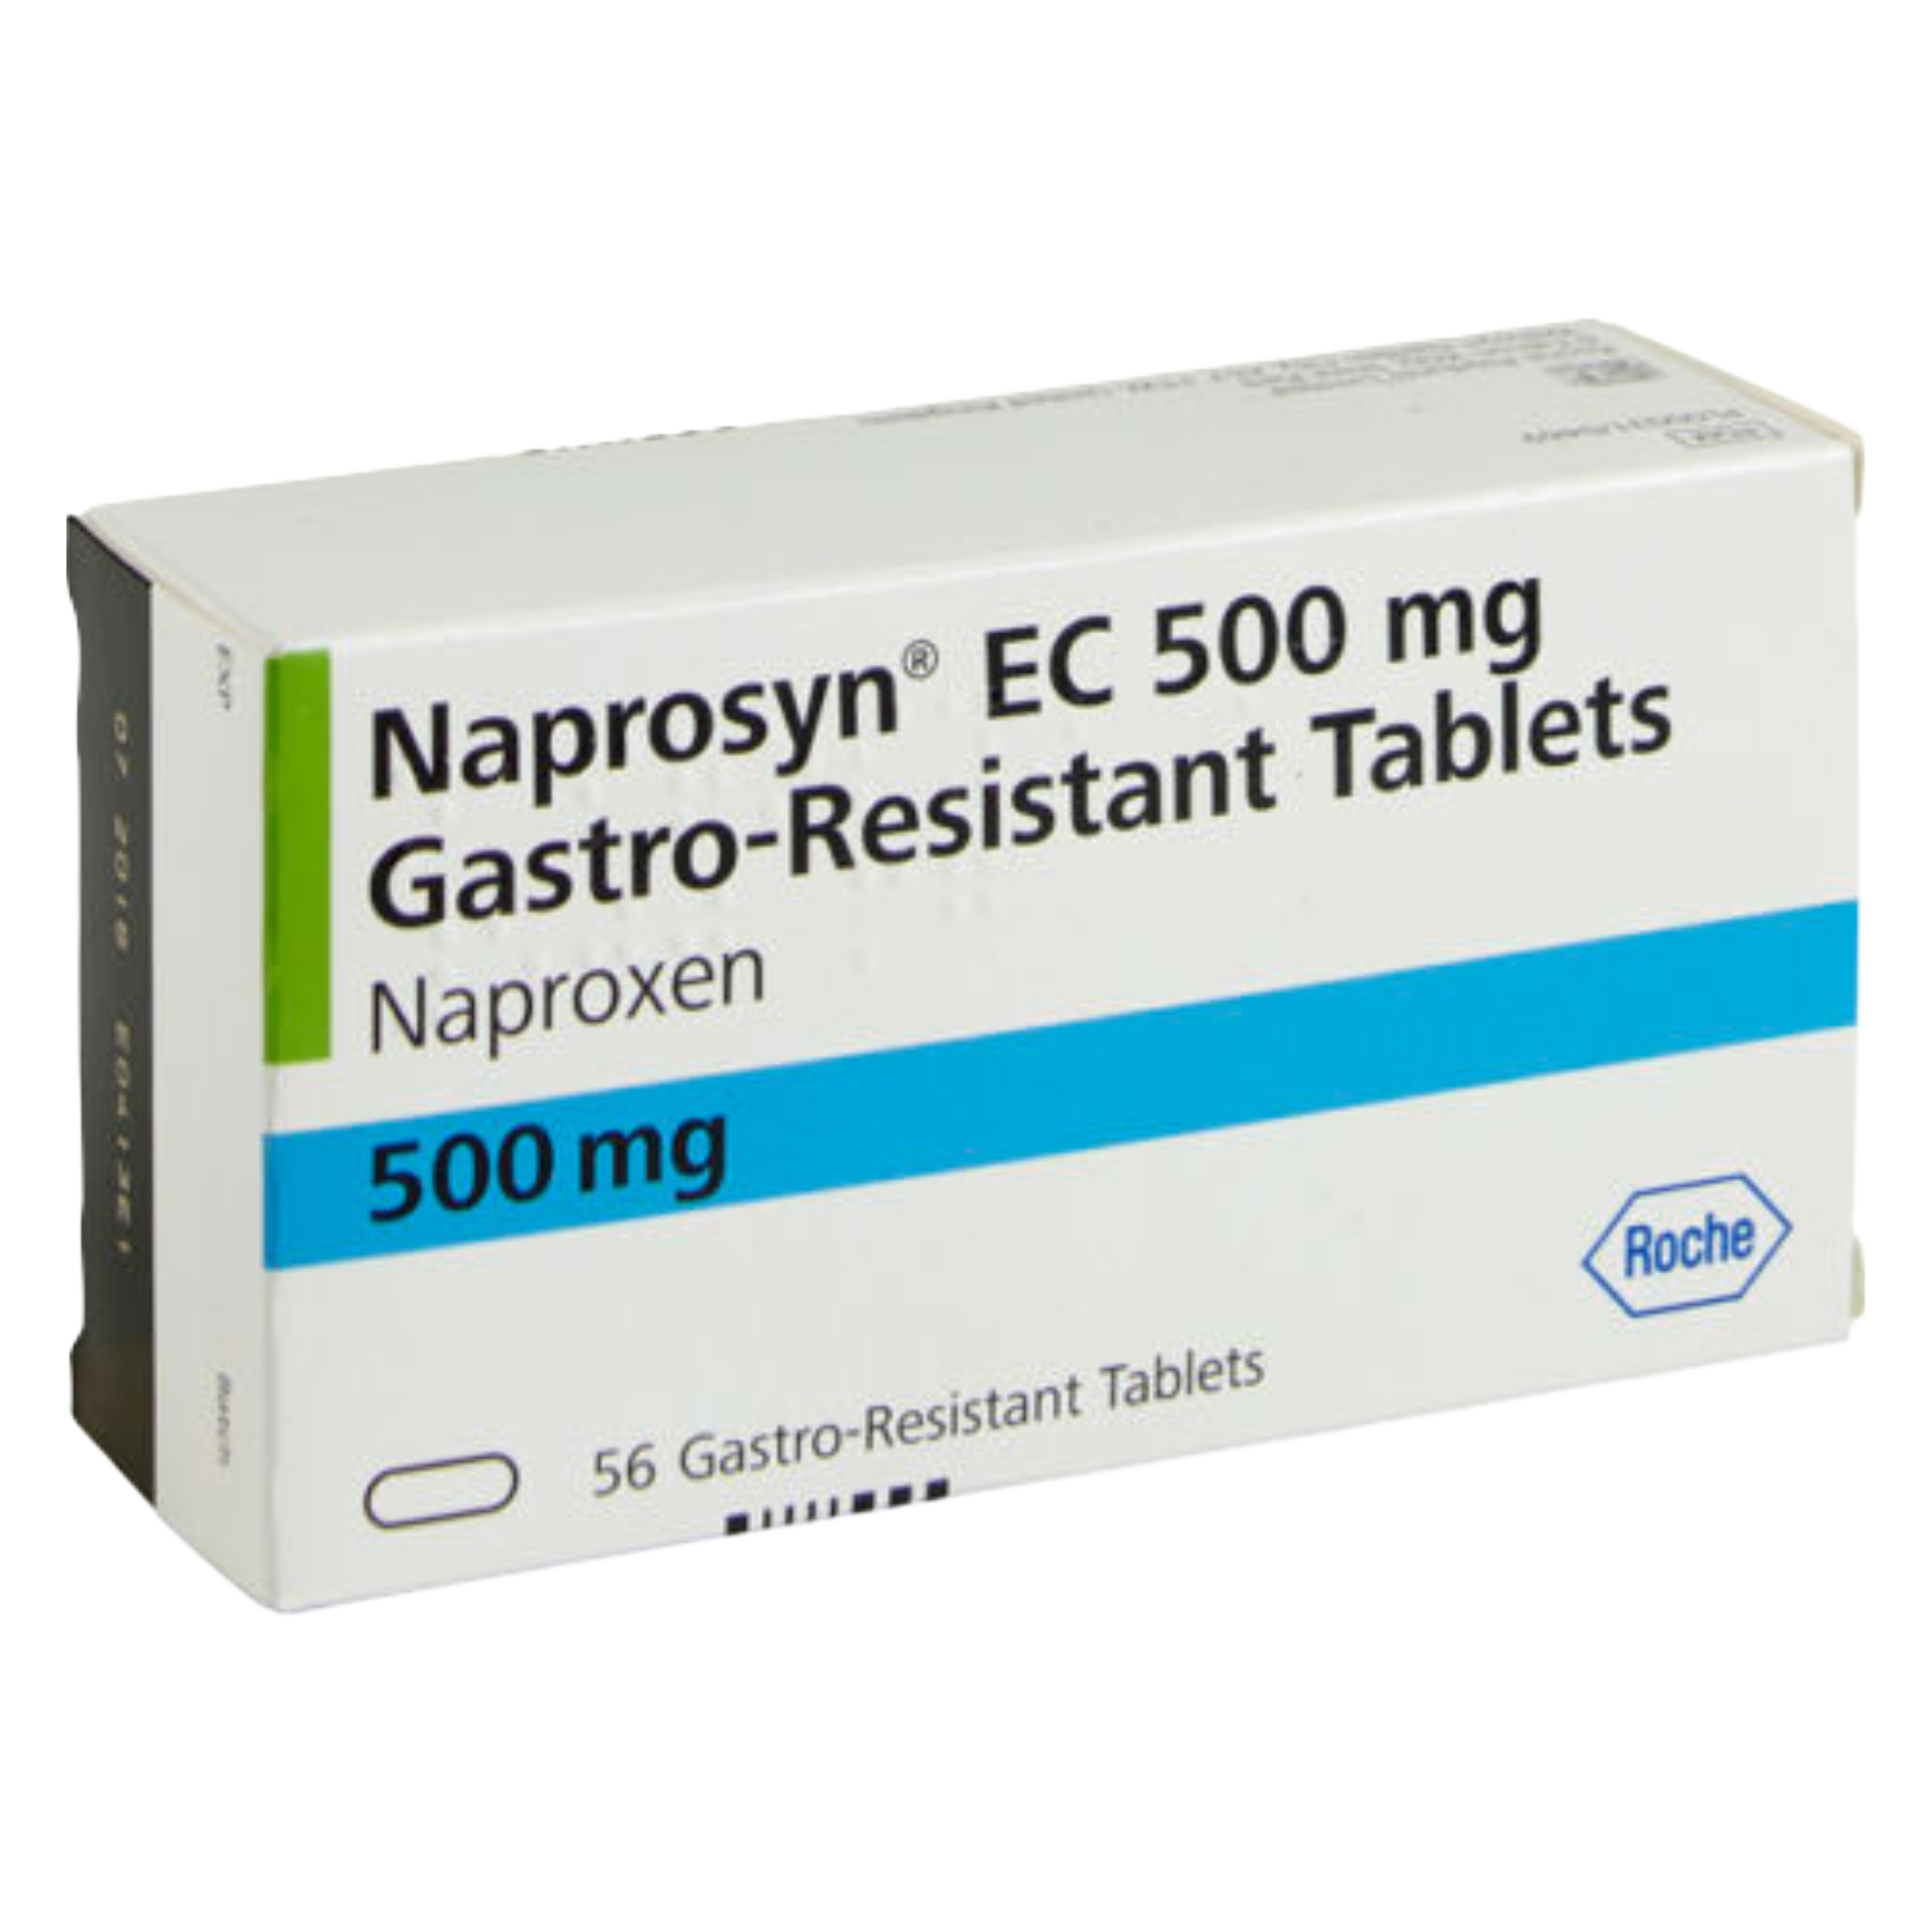 Naprosyn 250mg and 500mg Tablet